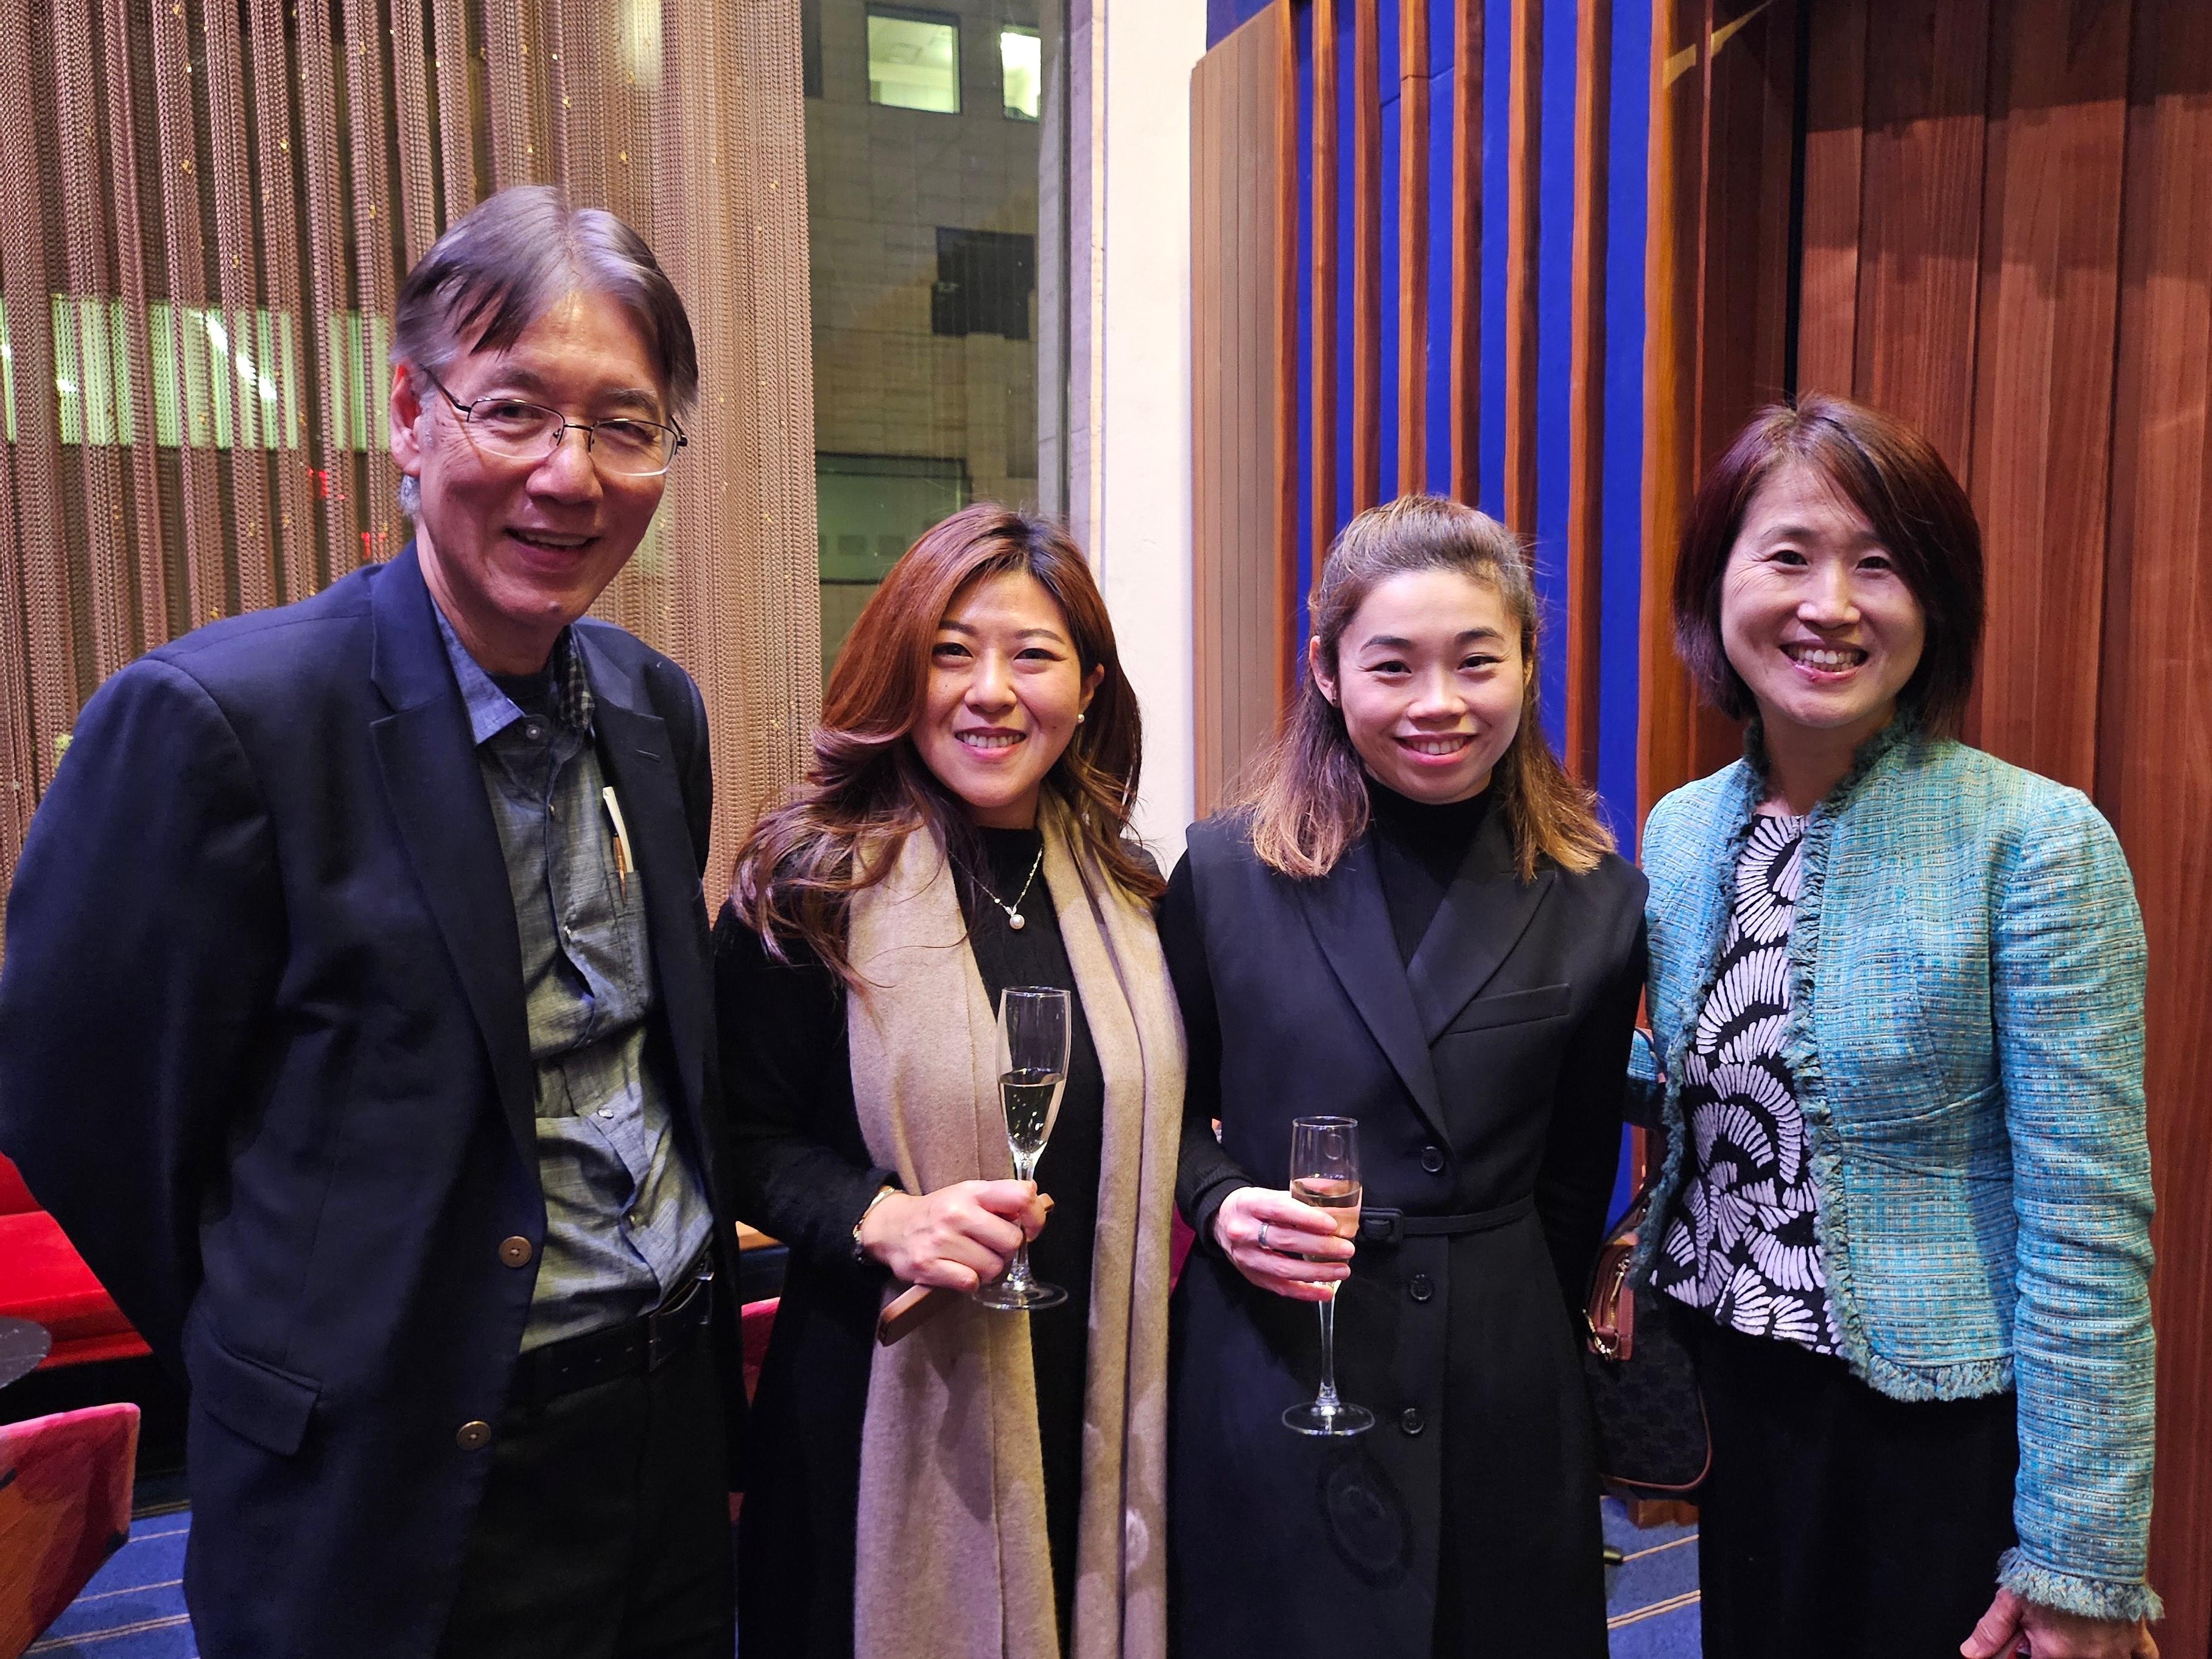 The Hong Kong Economic and Trade Office, New York (HKETONY) hosted a celebratory cocktail reception for Hong Kong conductor Elim Chan at her debut with the New York Philharmonic at David Geffen Hall, Lincoln Centre on March 8 (New York time). Photo shows the Director of the HKETONY, Ms Maisie Ho (second left), Elim Chan (second right) and other guests at the reception.